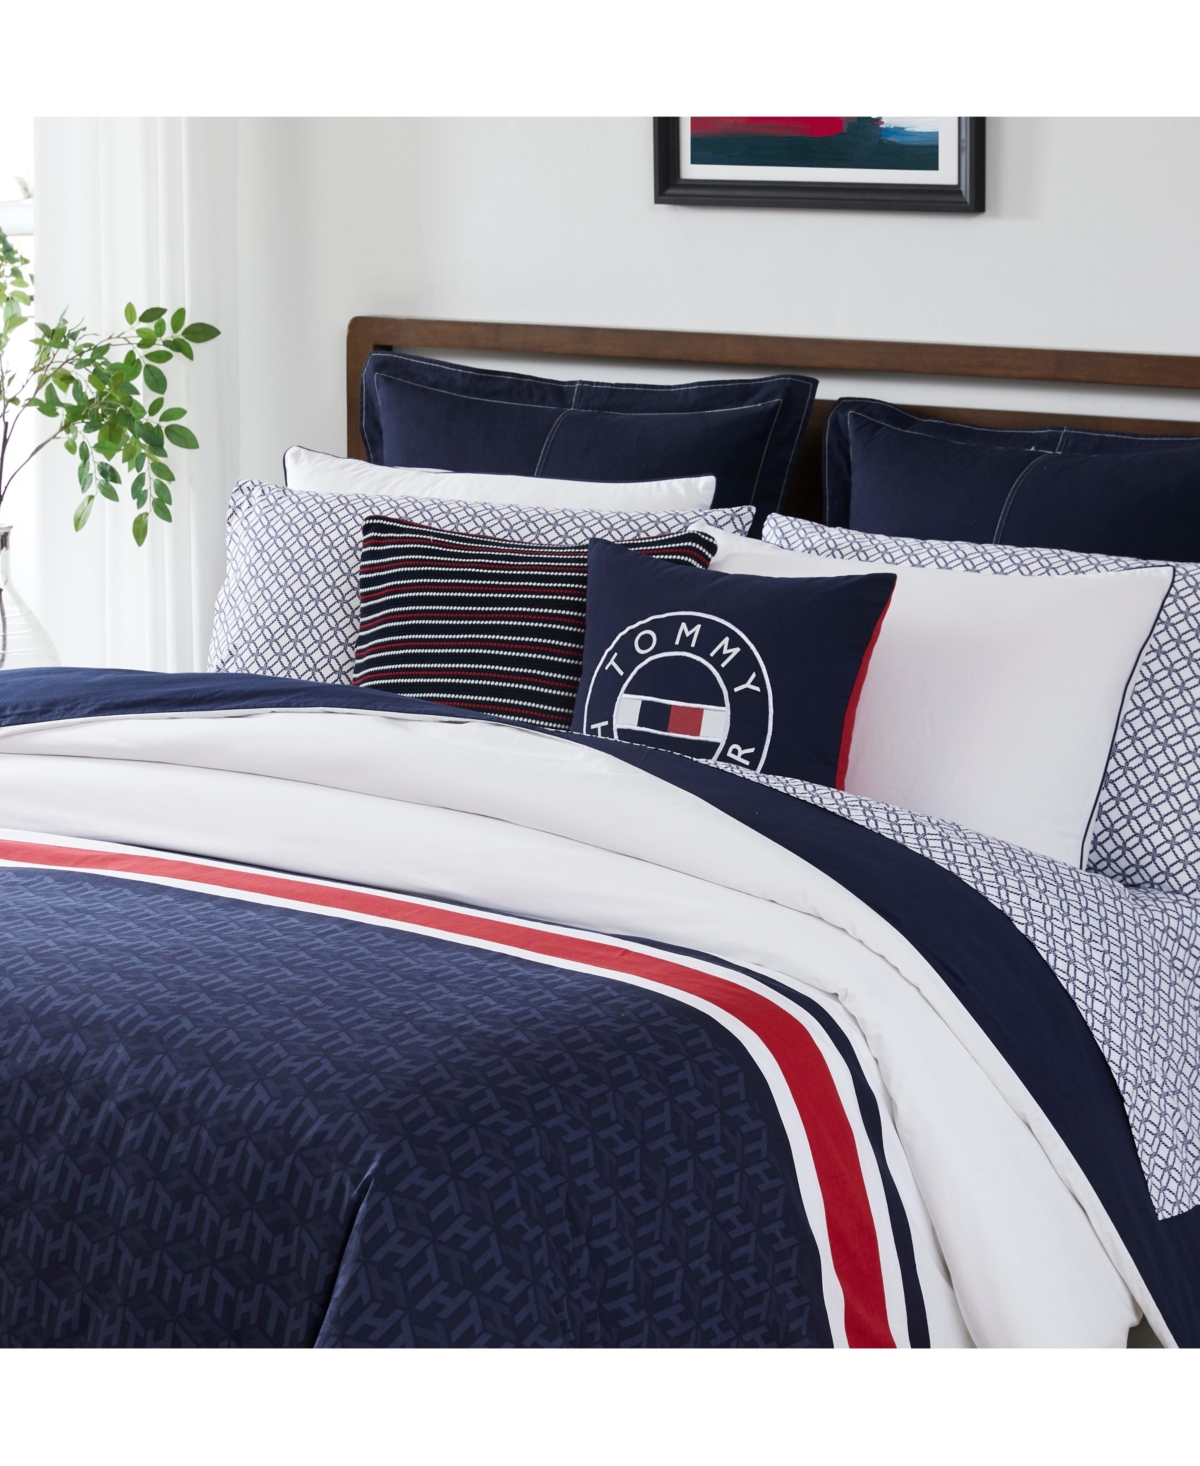 TOMMY HILFIGER Bed Sale, Up To 70% Off |